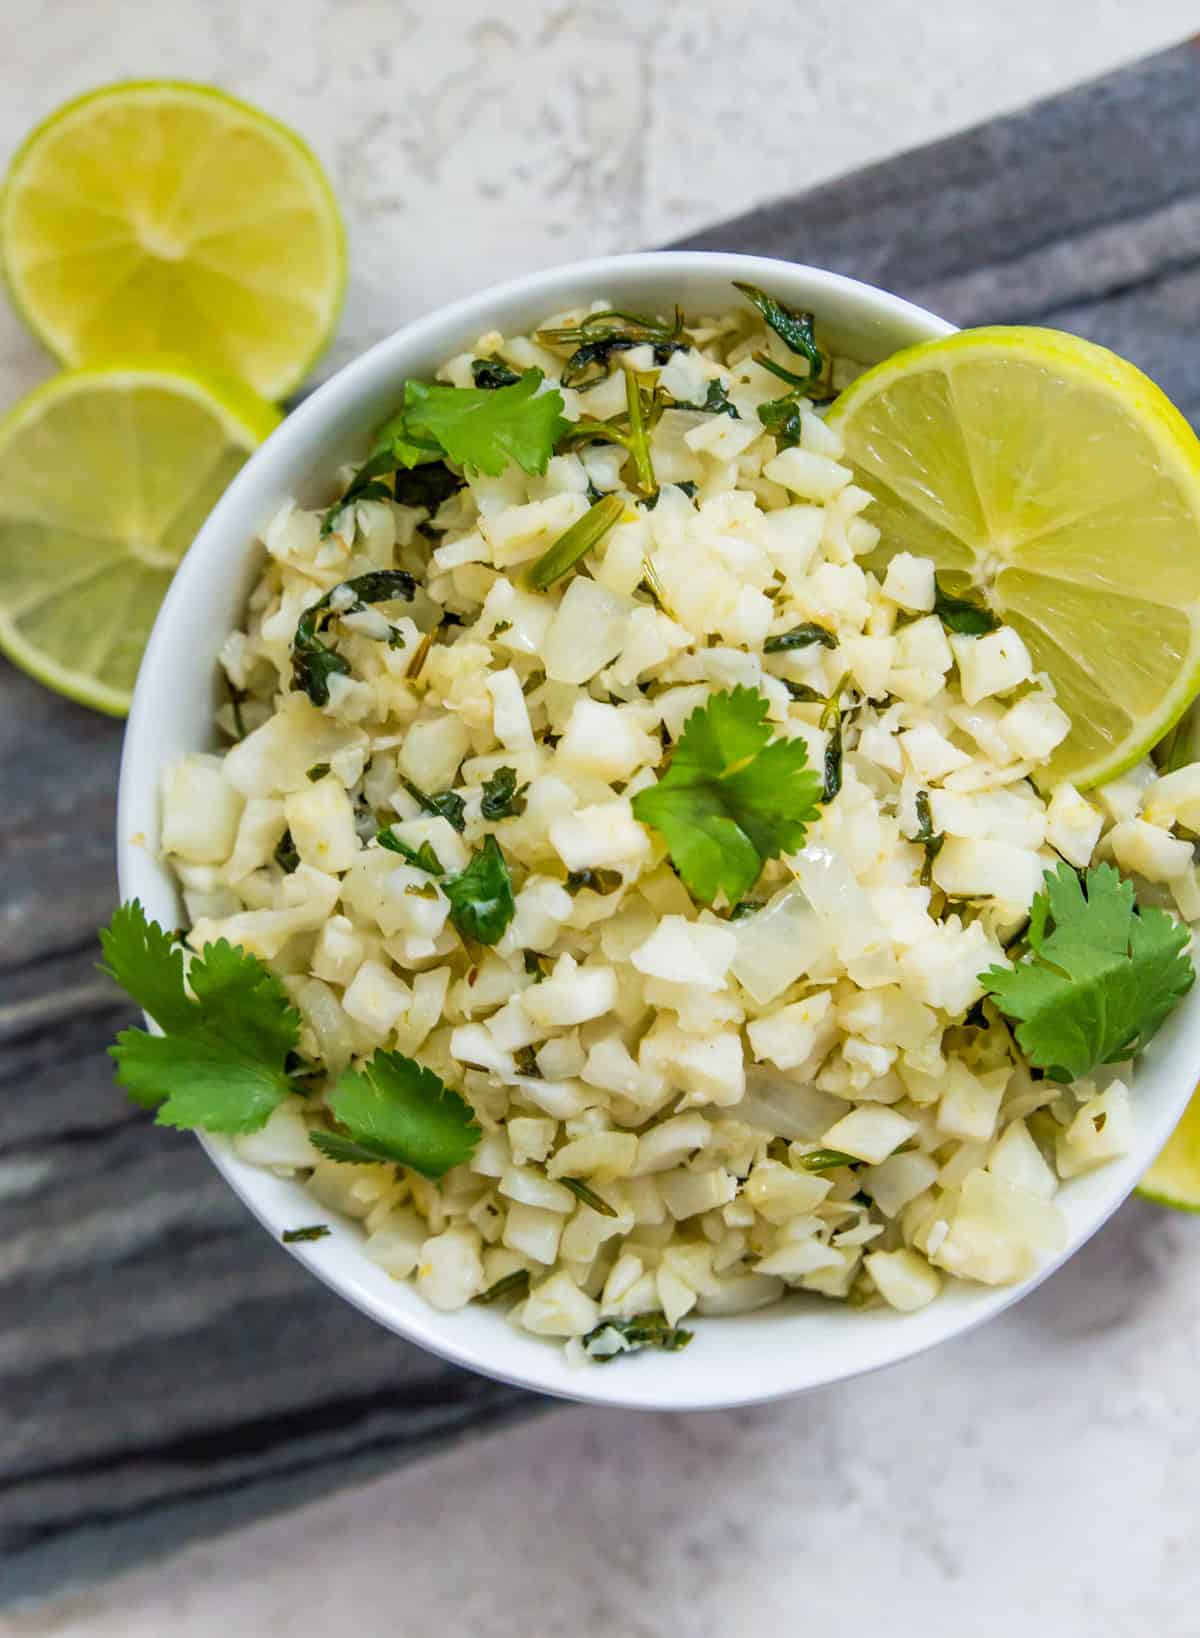 A bowl of cilantro lime cauliflower rice garnished with cilantro and with lime wedges in it.